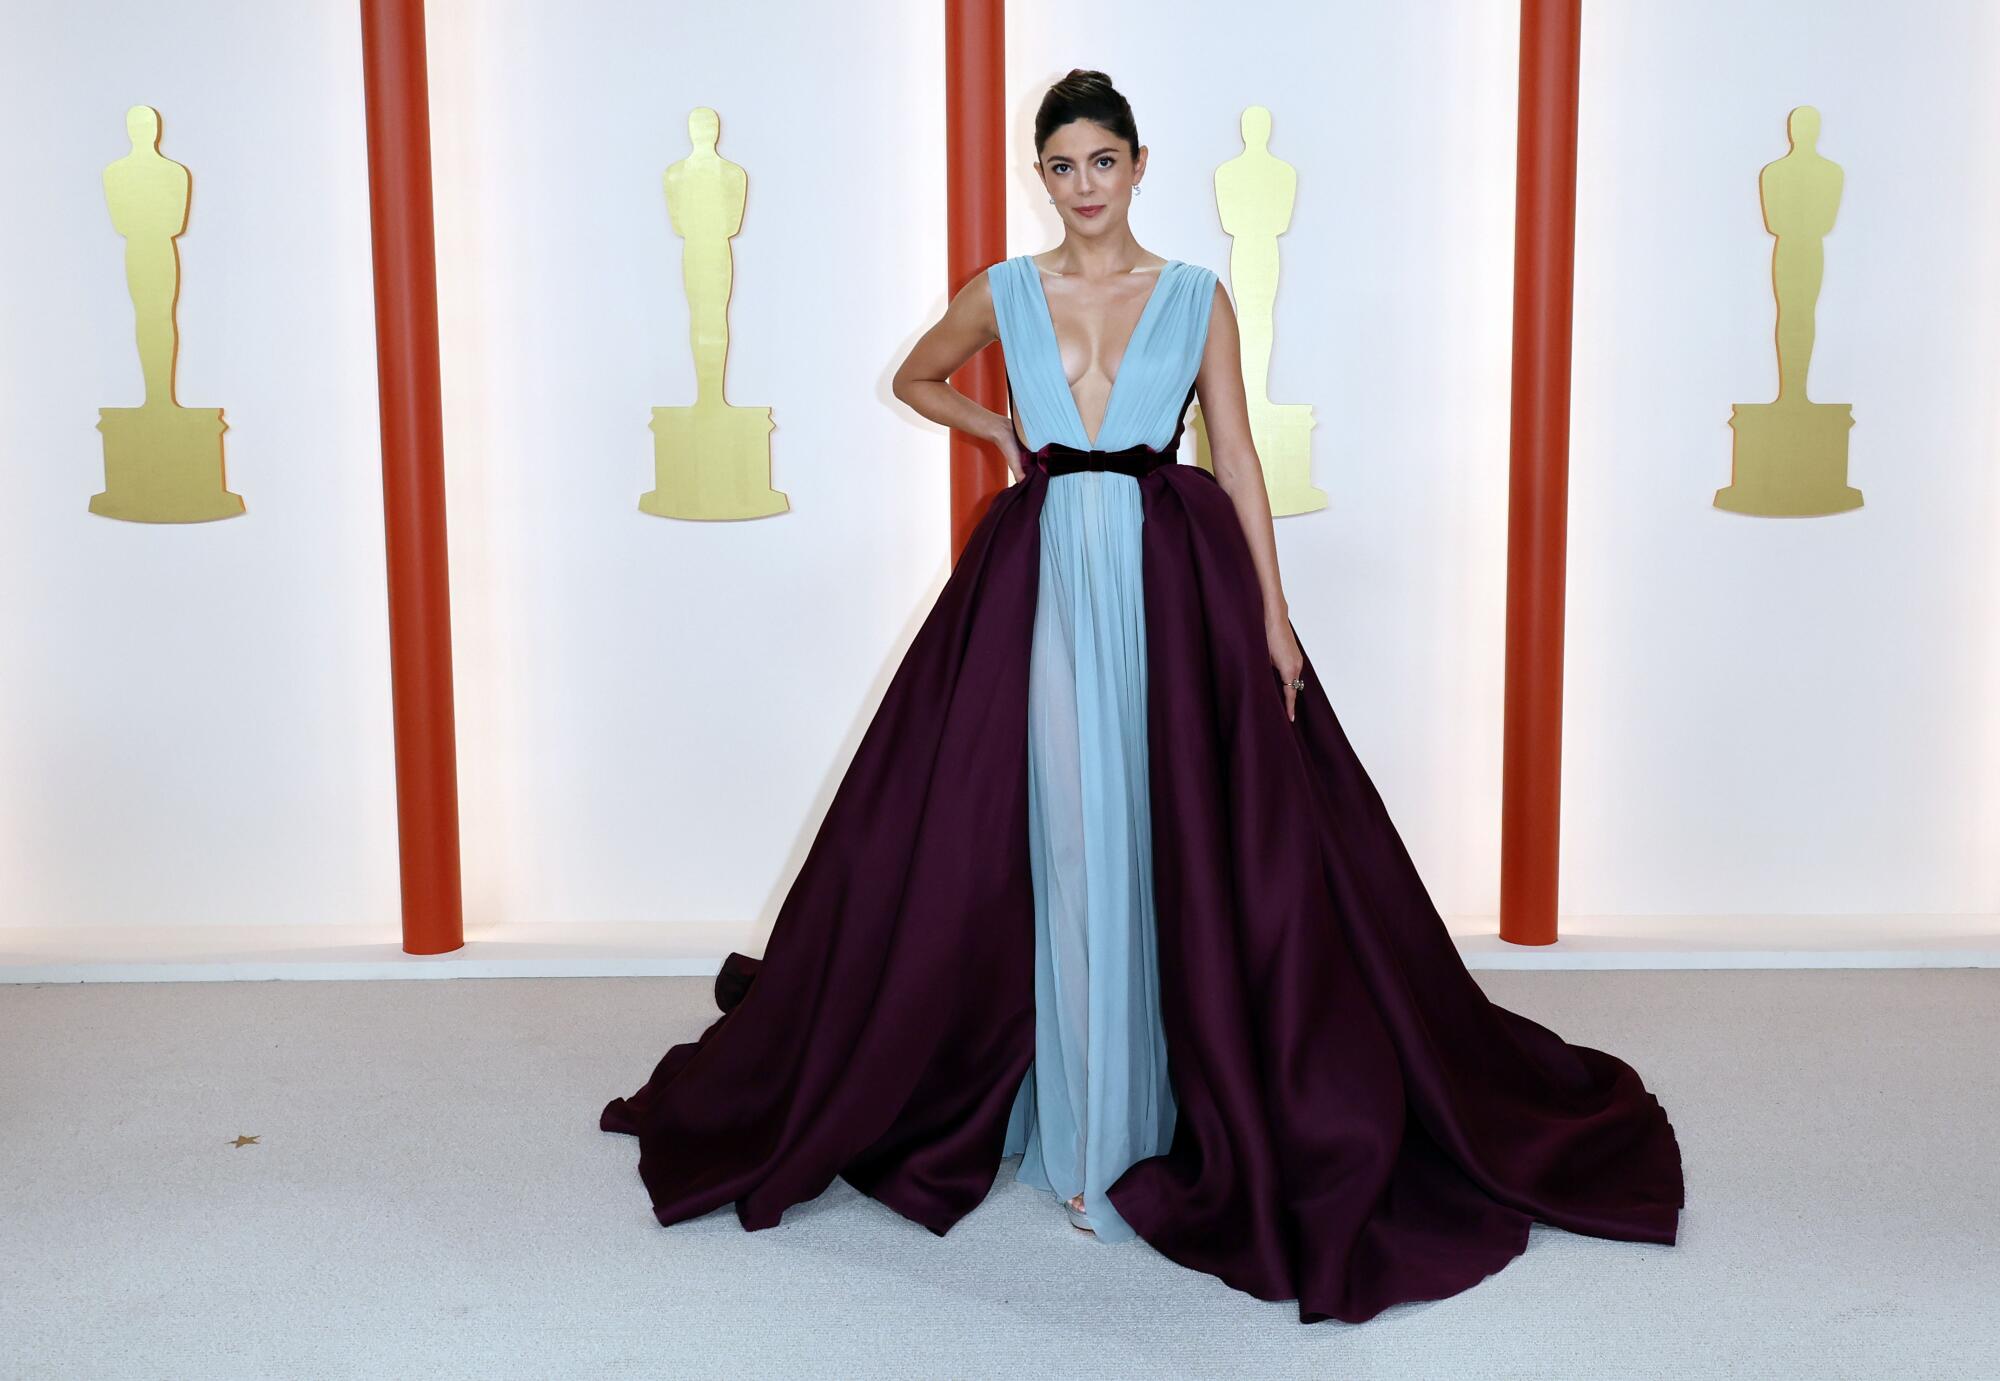 Monica Barbaro in a light blue gown with darker wrap-around, floor length skirt.